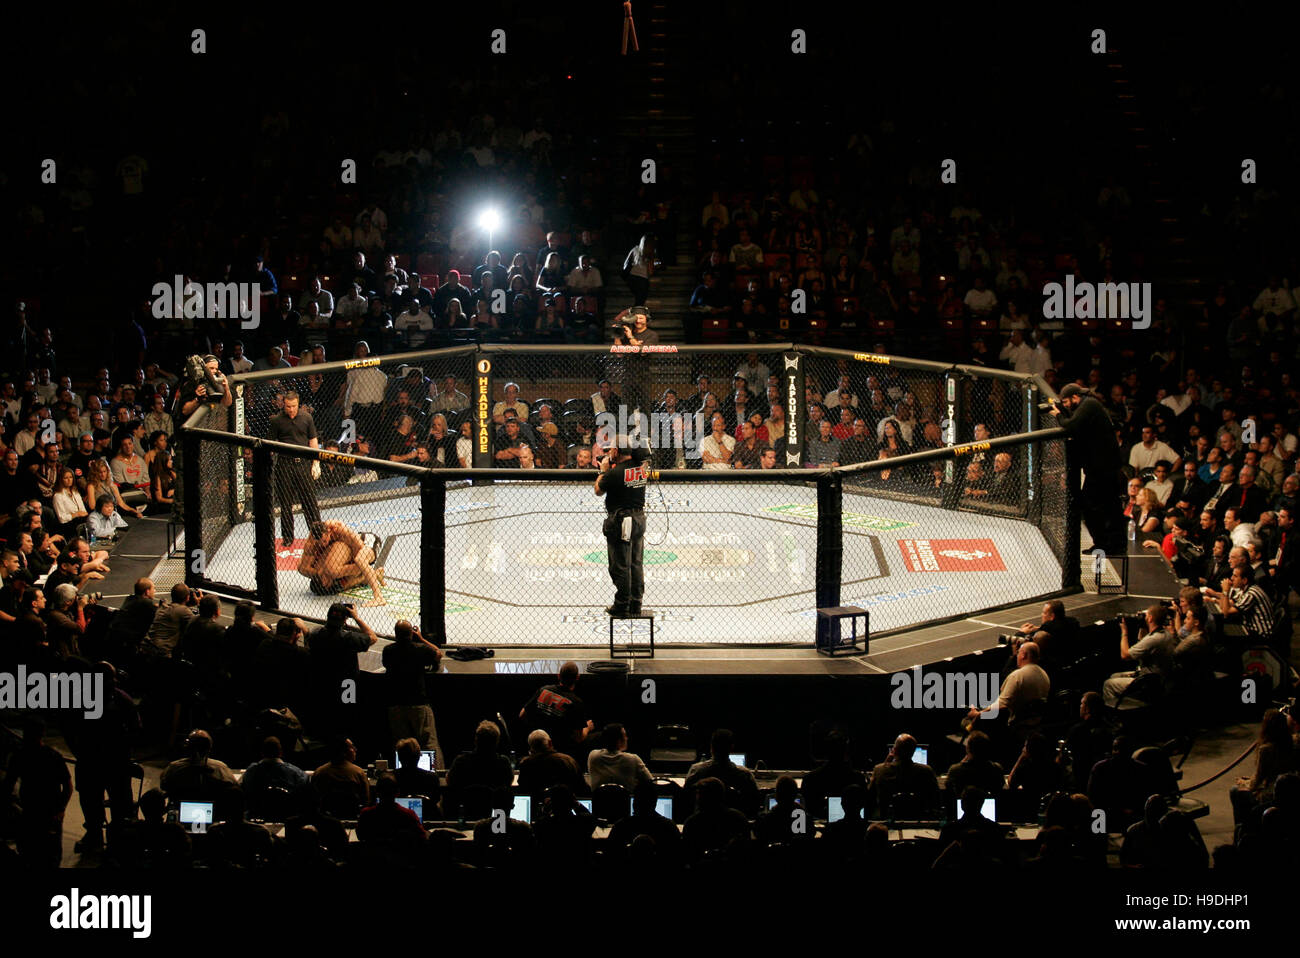 UFC didn't know it had wrong canvas until unwrapped for UFC Fight Night 41  | MMA Junkie